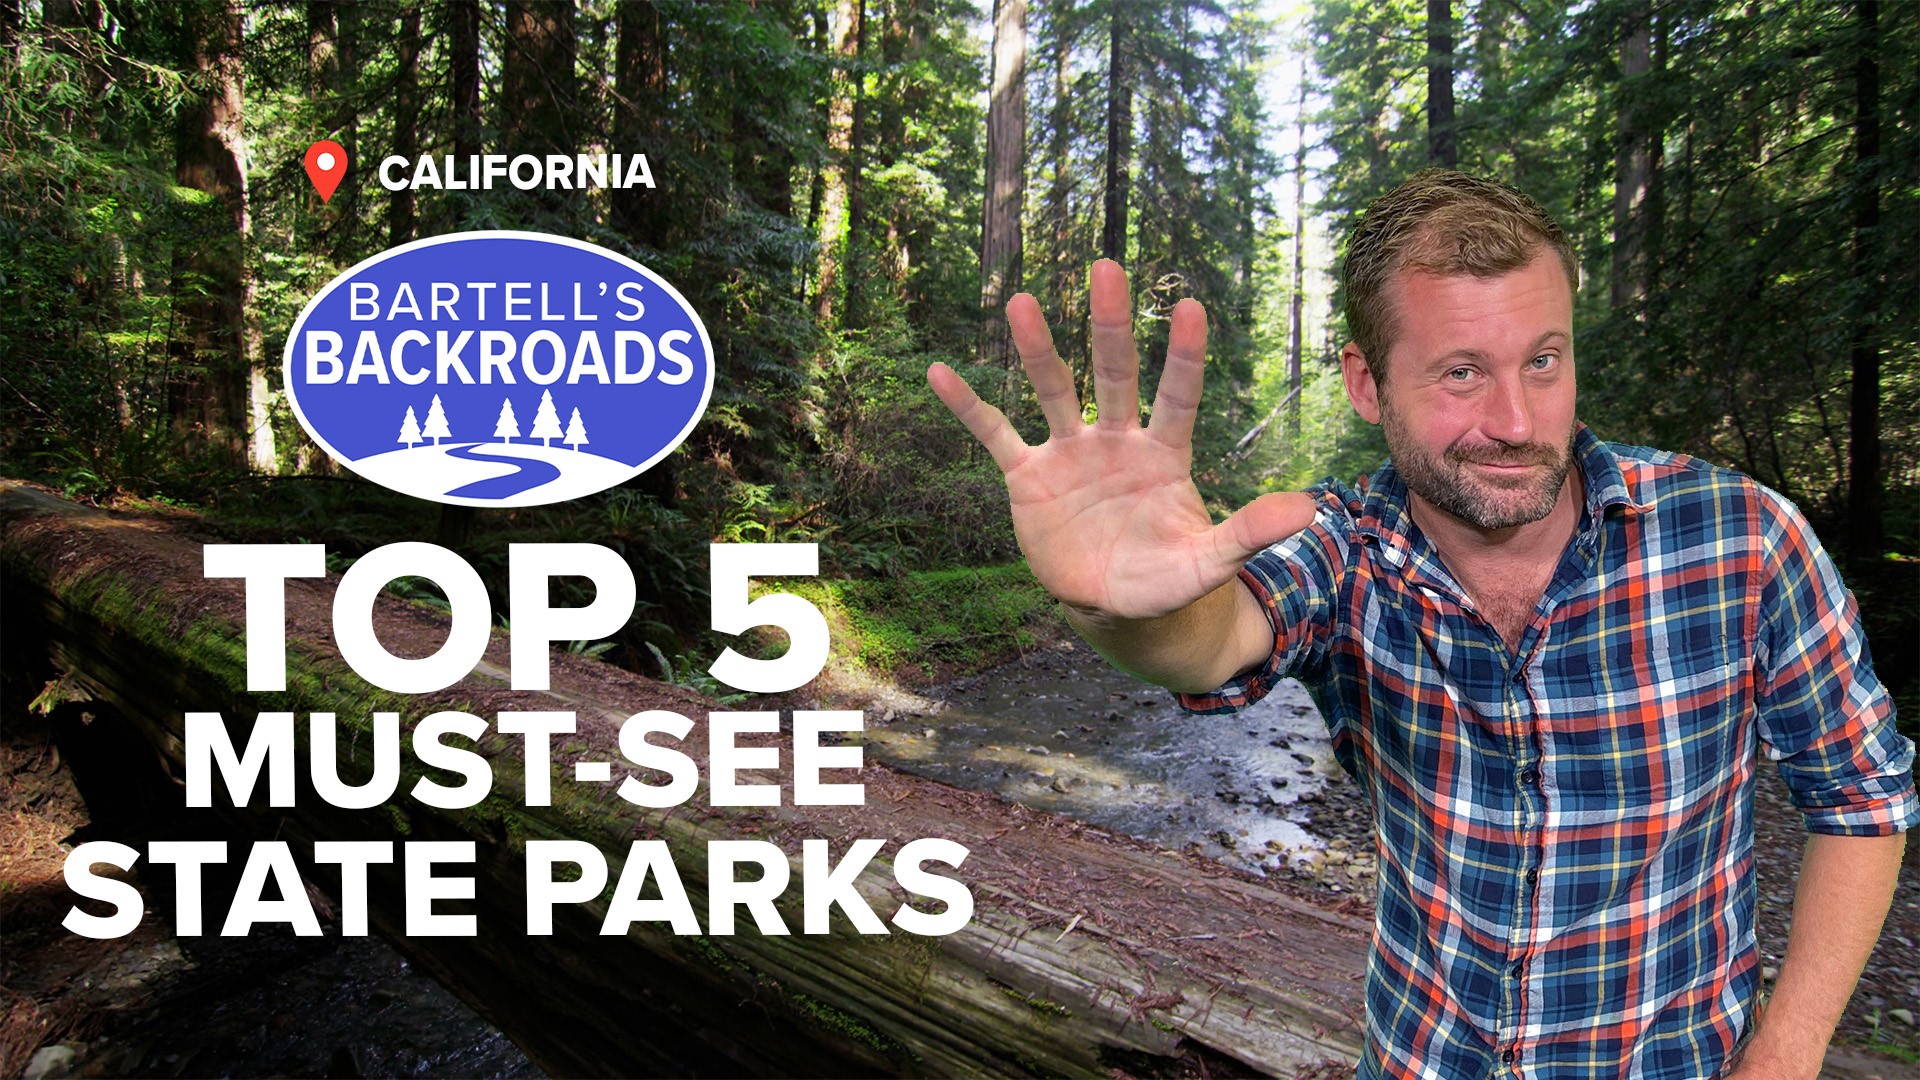 Here are Bartell's Backroads top 5 must-see state parks for California State Parks Week.